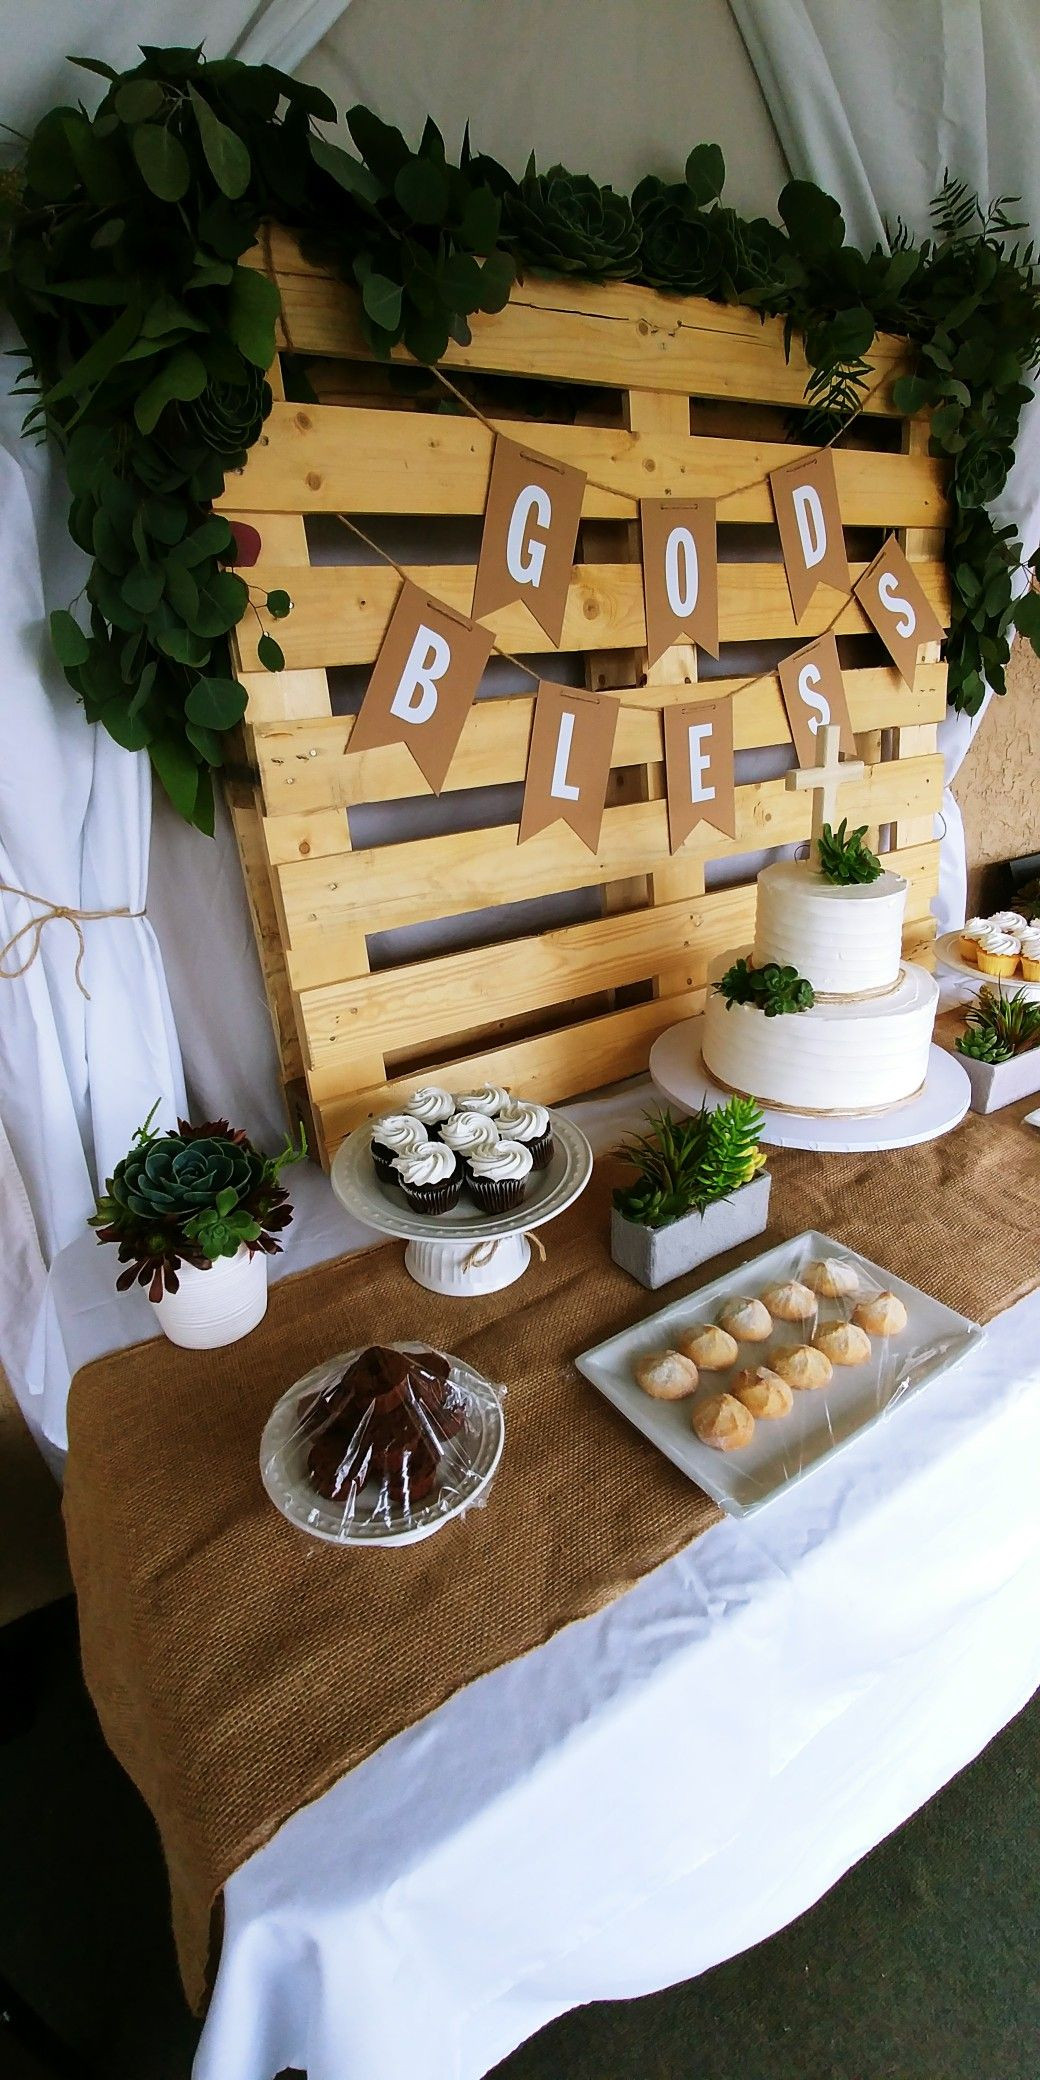 Backyard Baptism Party Ideas
 Garden rustic baptism loveforvicky With images